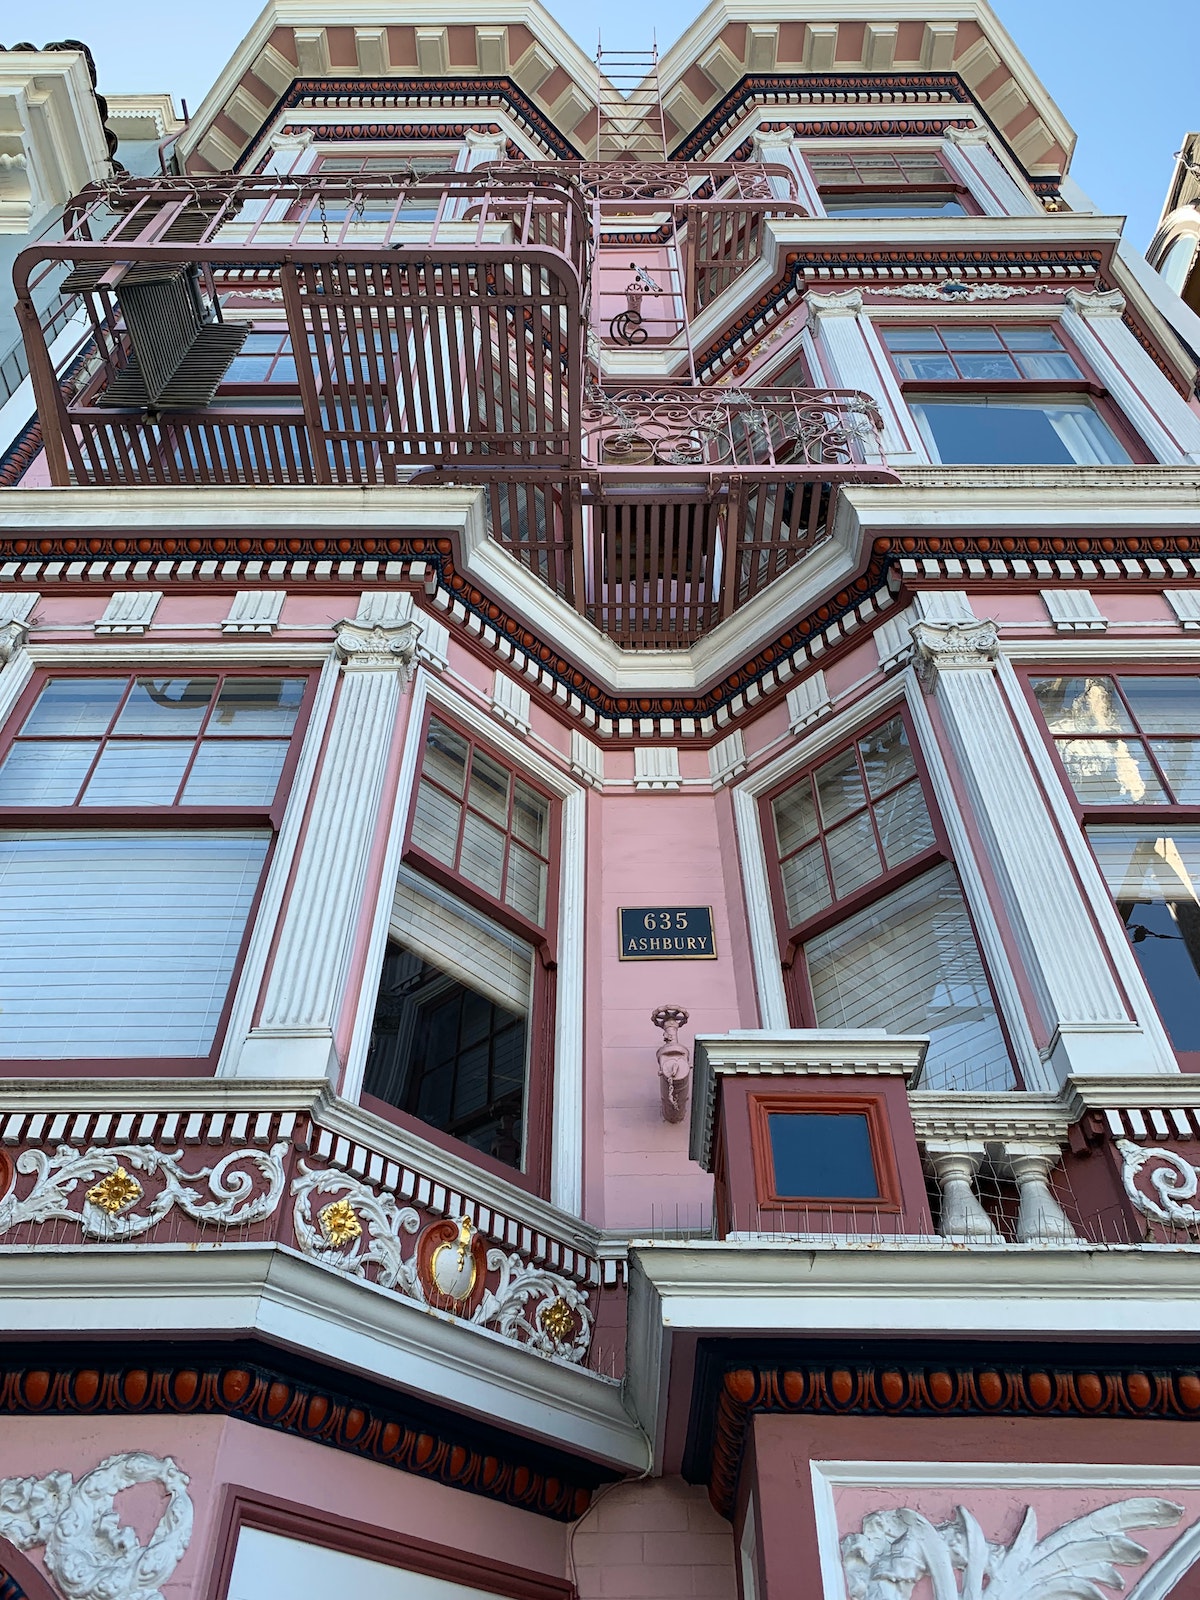 Architecture detail of the Janis Joplin house, a pink Victorian style architecture with intricate decoration